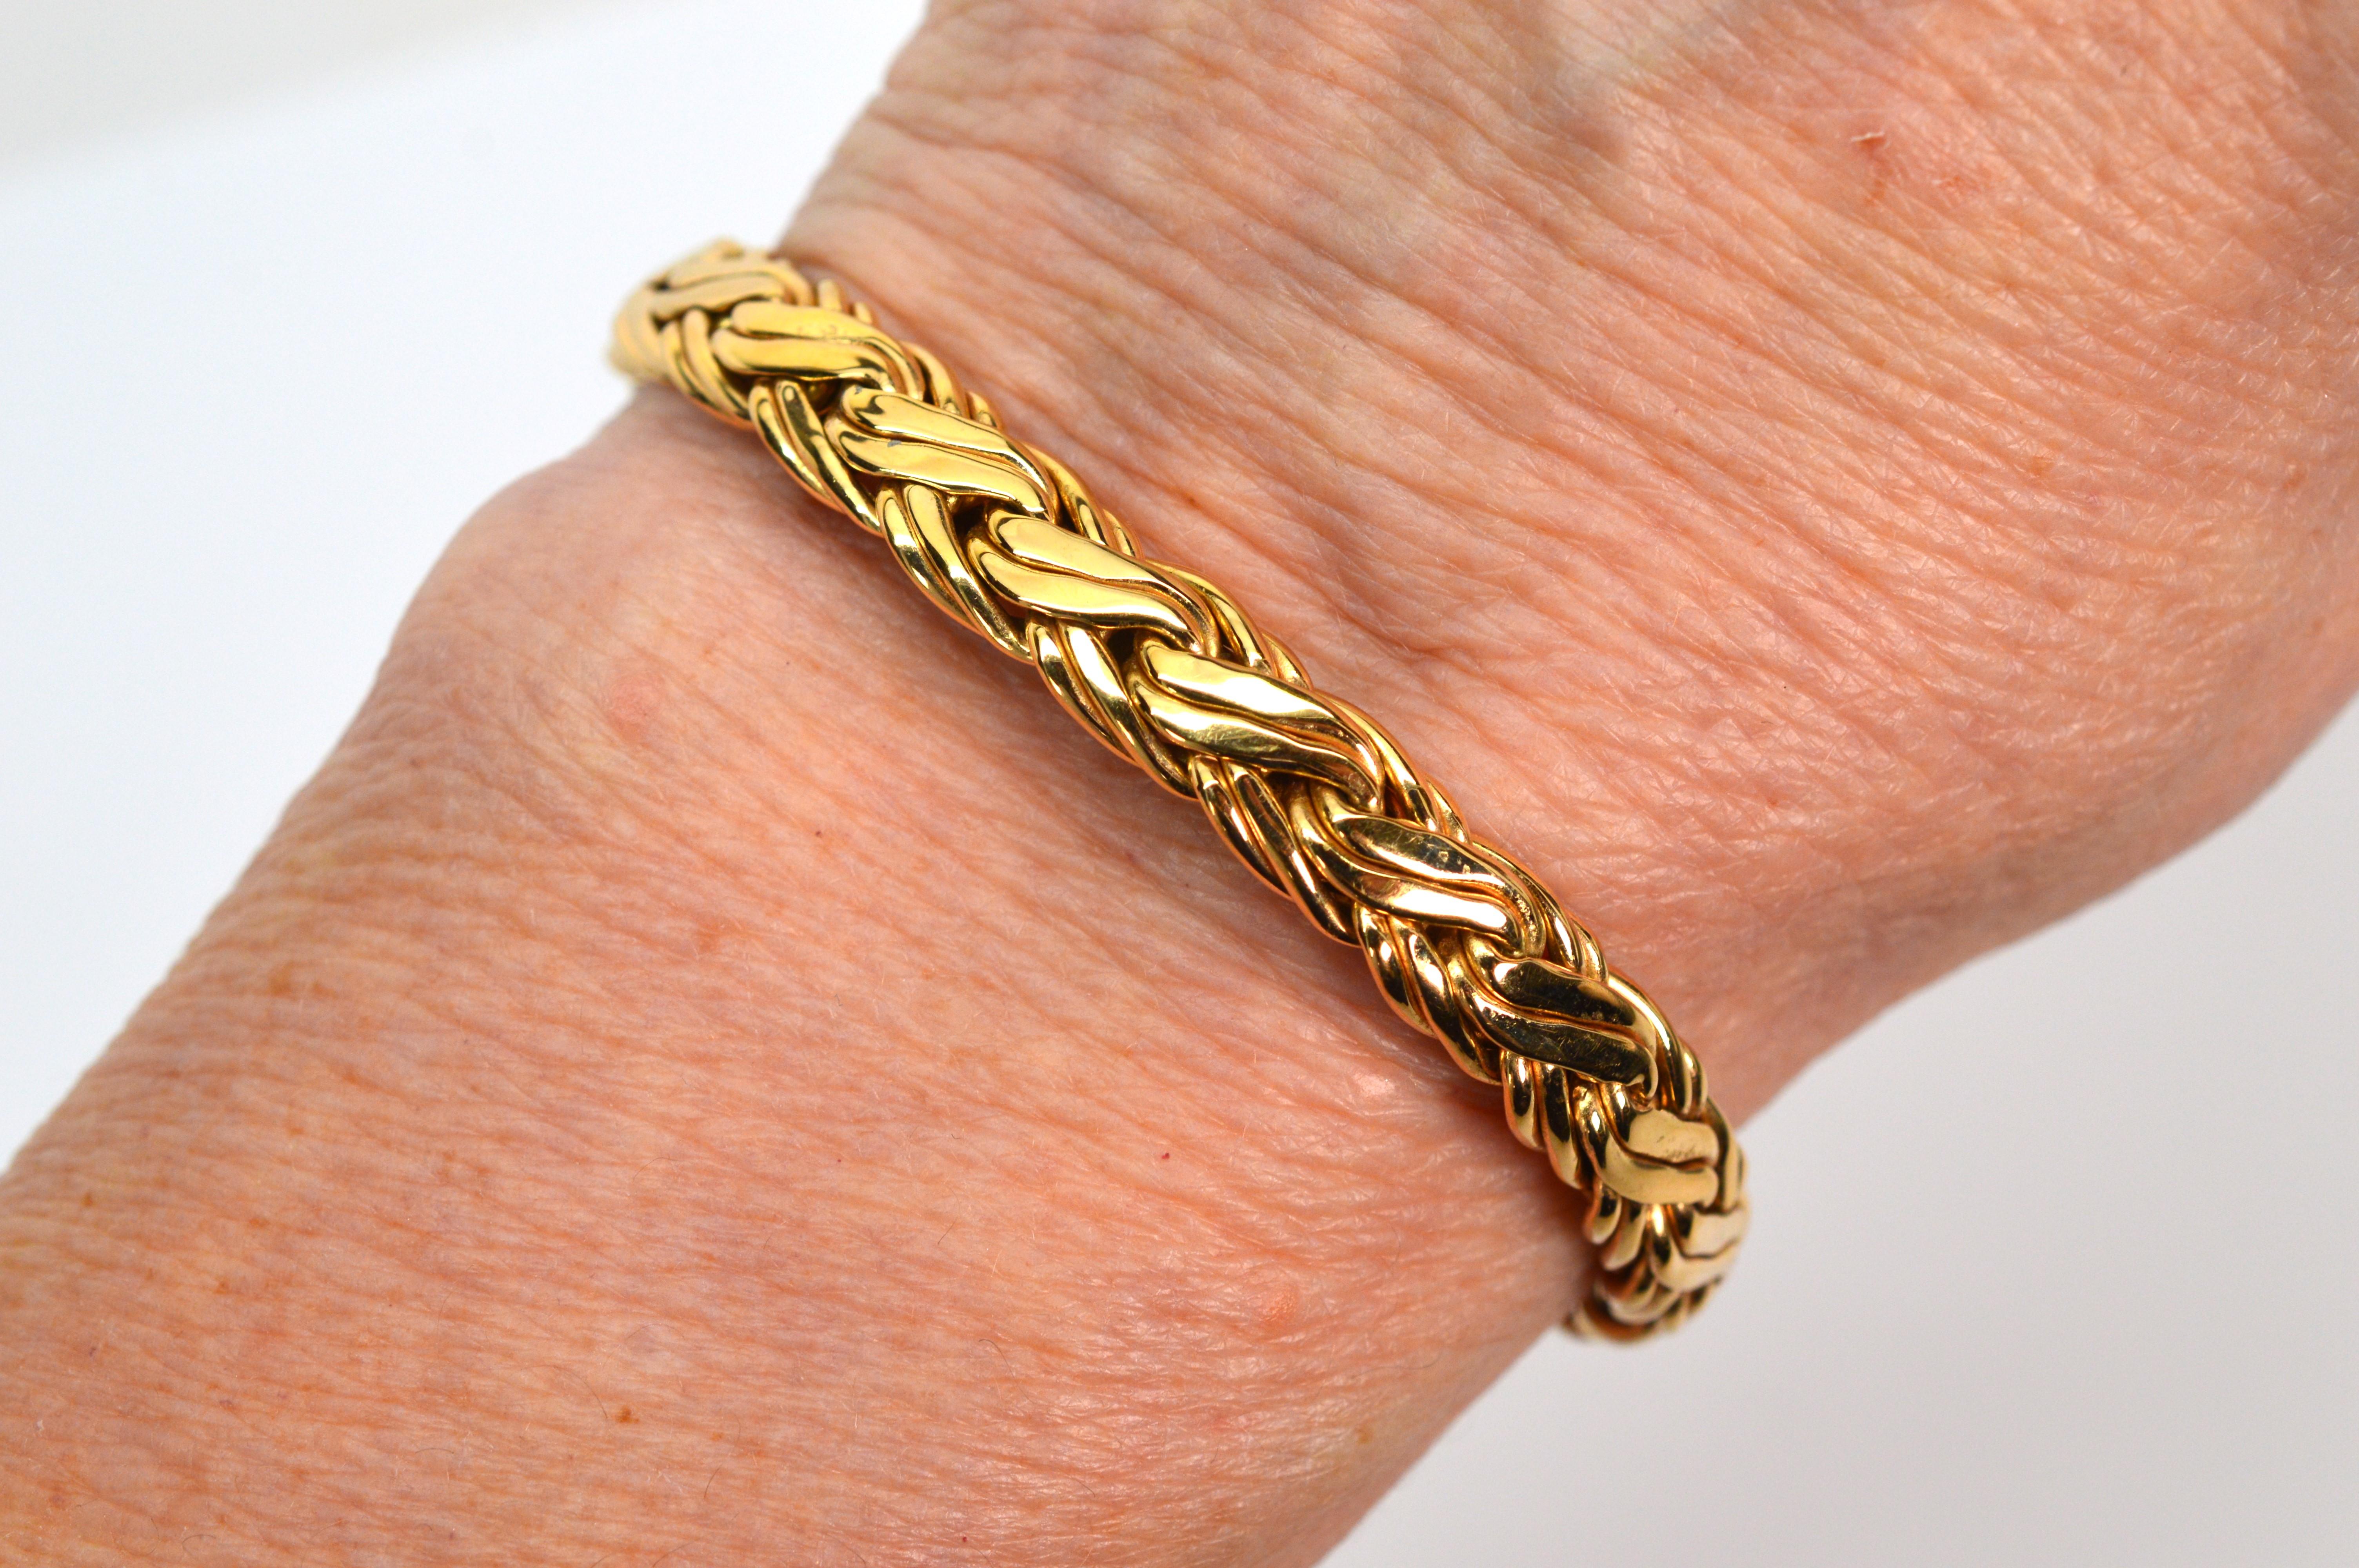 Superbly constructed in 14 karat yellow gold by known jewelers Zelman & Friedman. A fine staple piece to add to your jewelry wardrobe, this brightly polished round wheat chain bracelet is 7 inch in length and 12.5mm wide. The attractive and